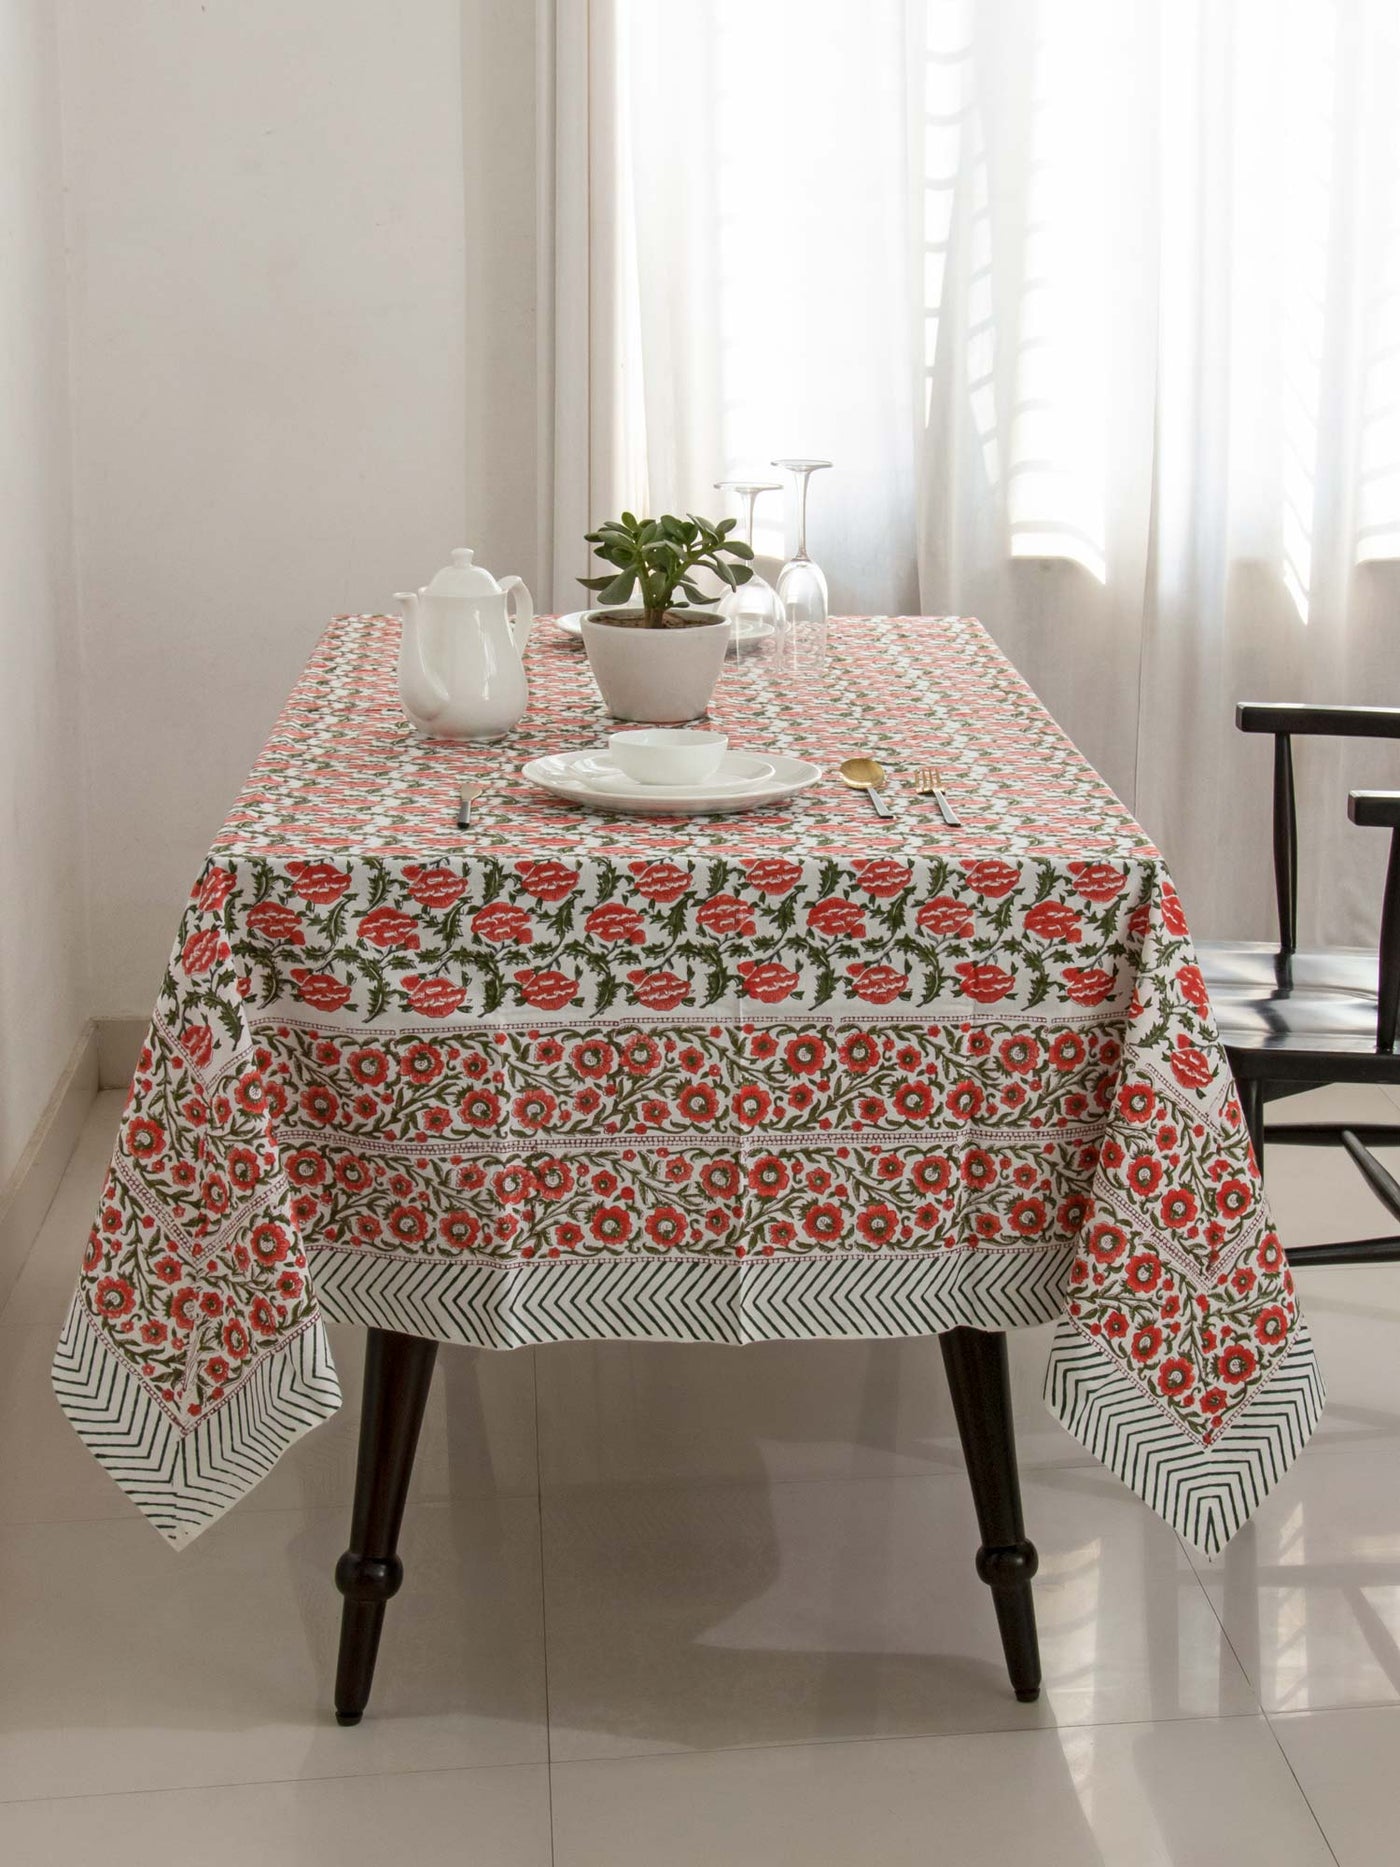 Red Flower bud Table cover